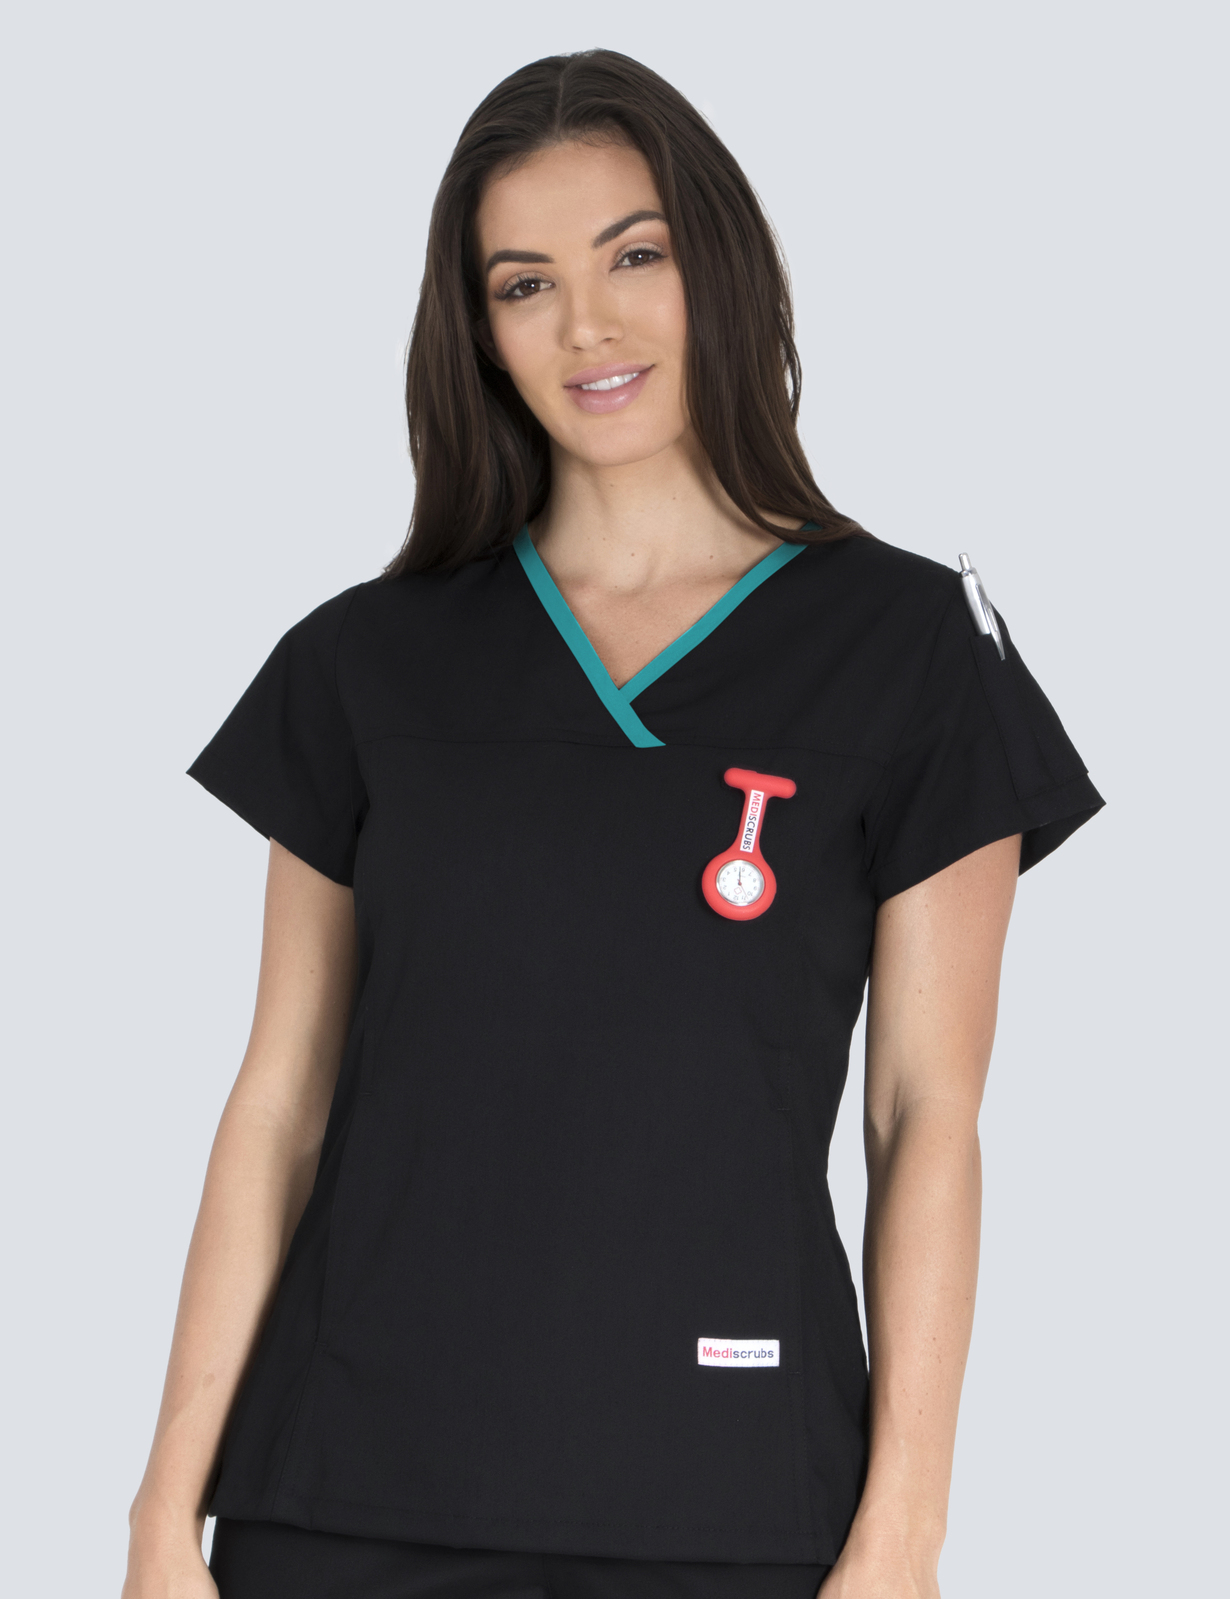 Caboolture Hospital - ICU CN (Women's Fit Solid in Black With Teal Trim incl Logos)